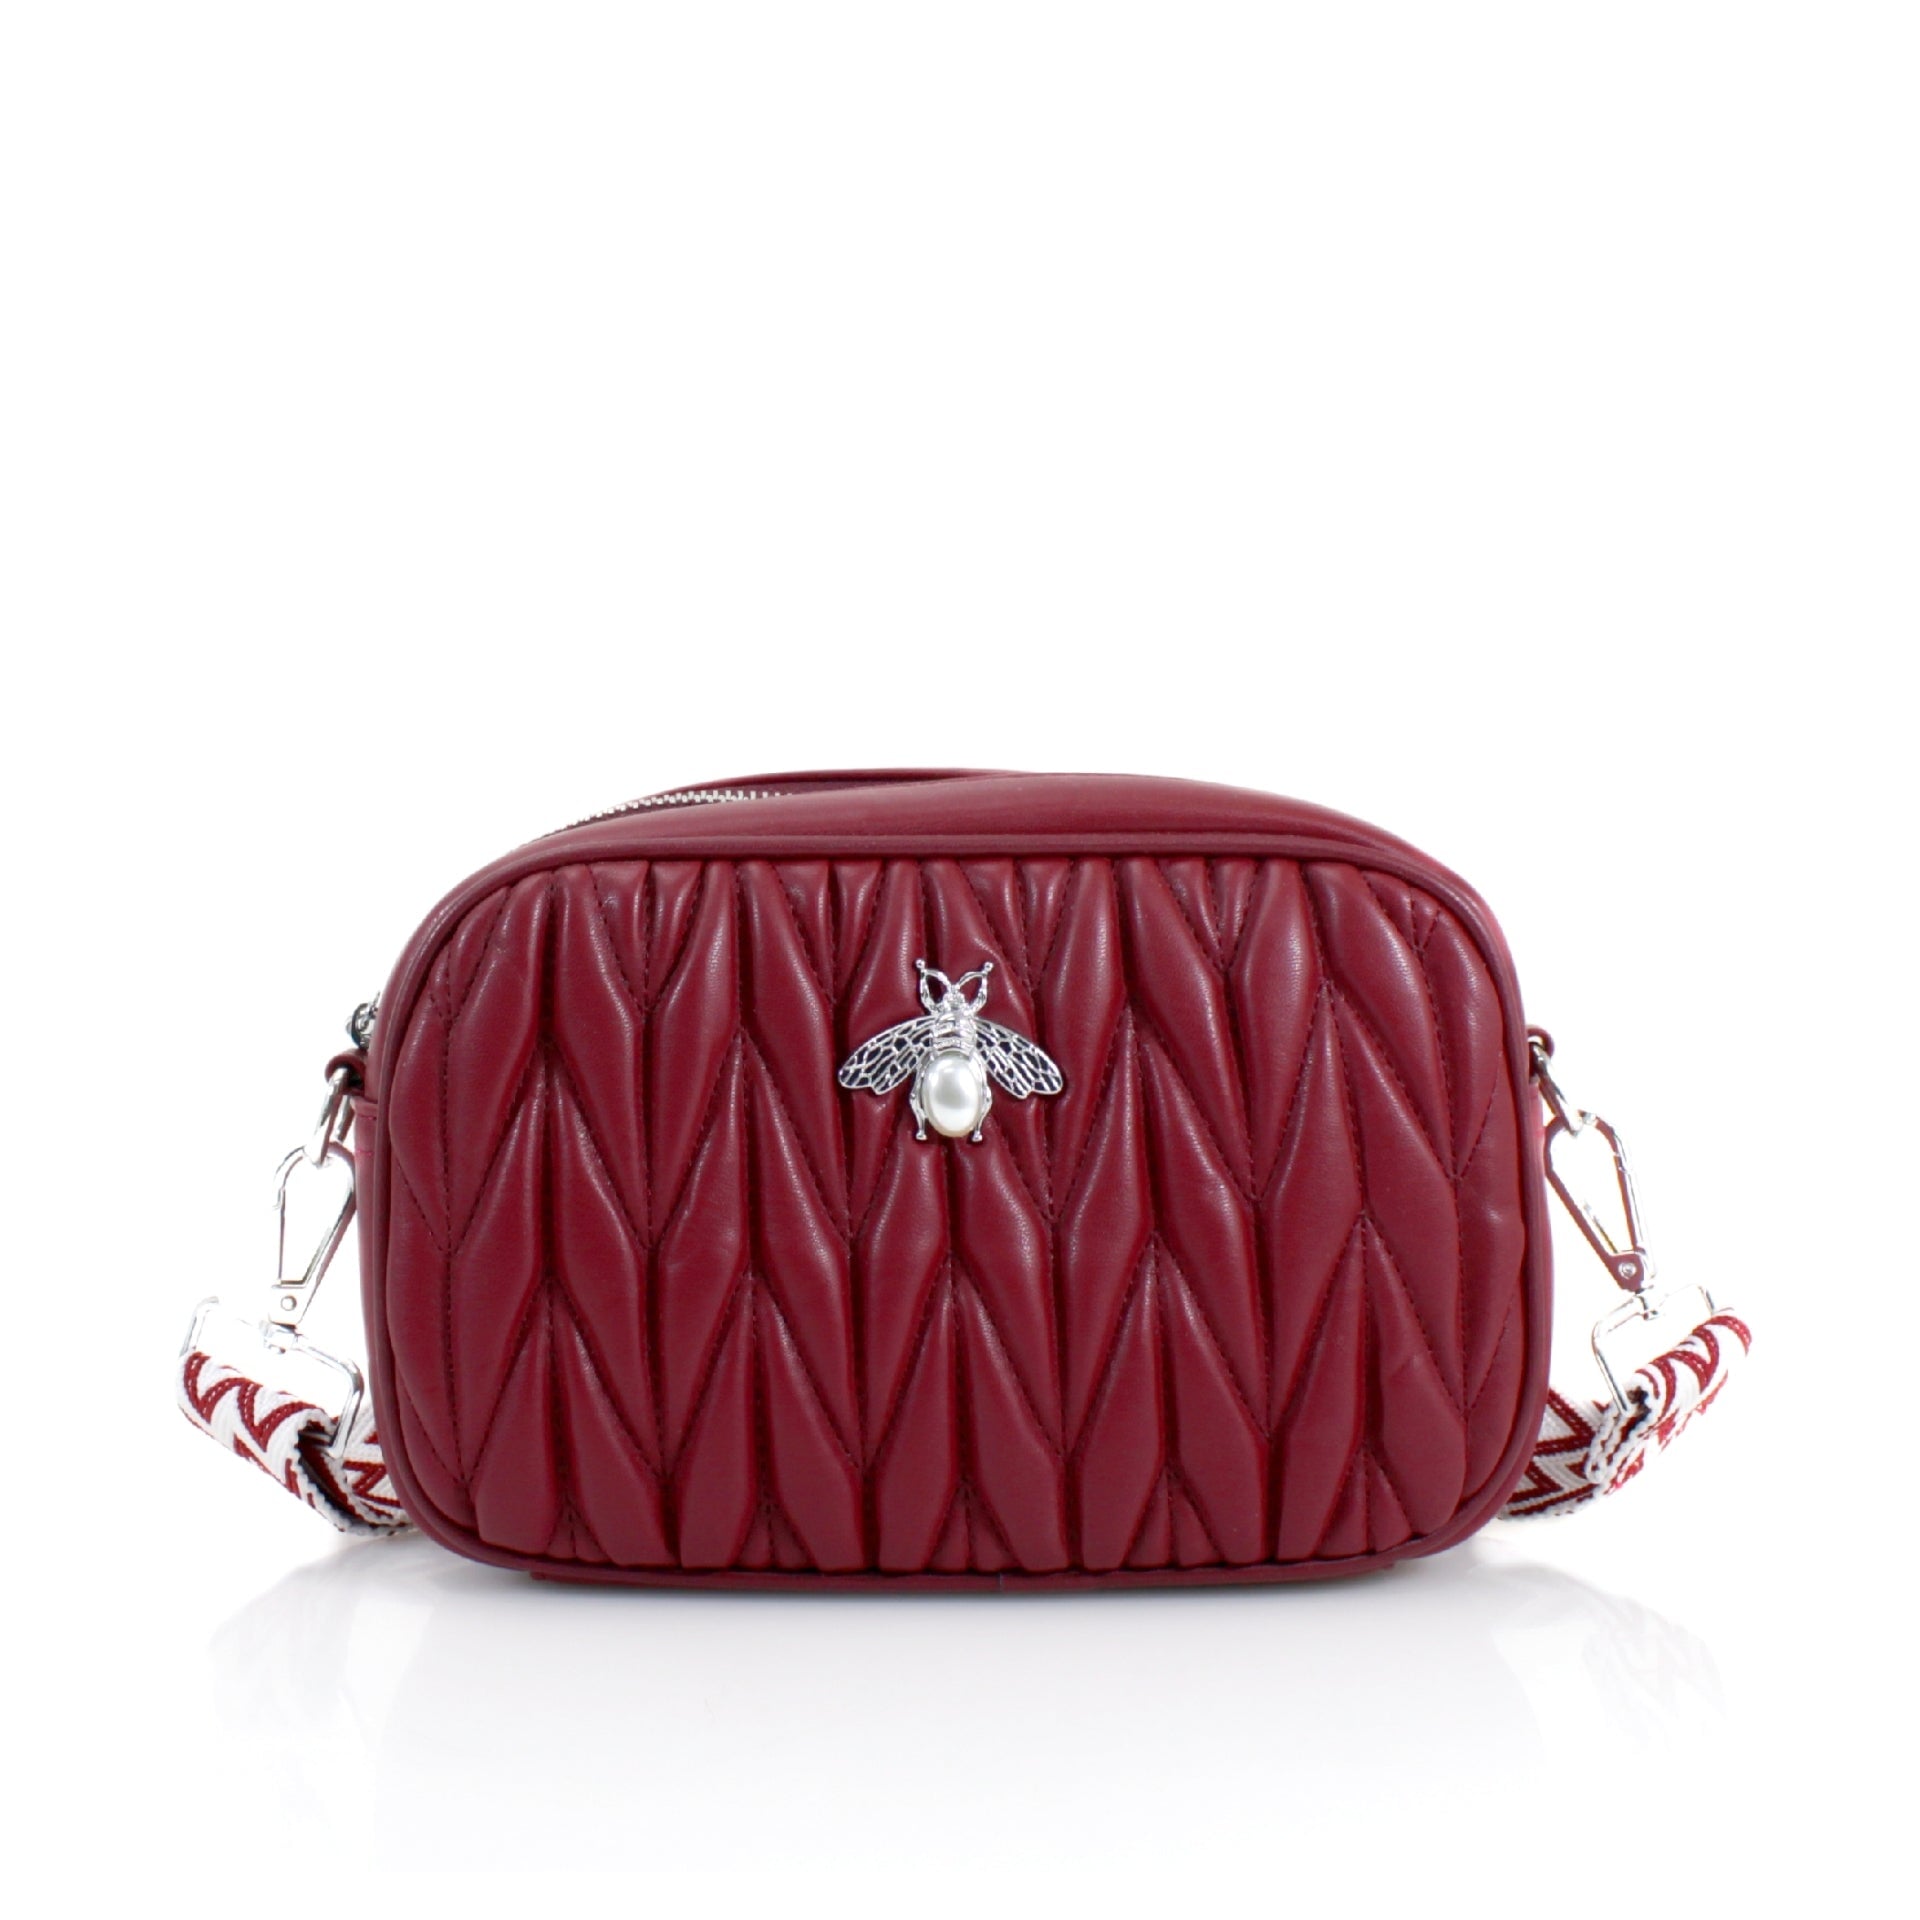 WINE BEE LOGO QUILTED CROSS BODY BAG